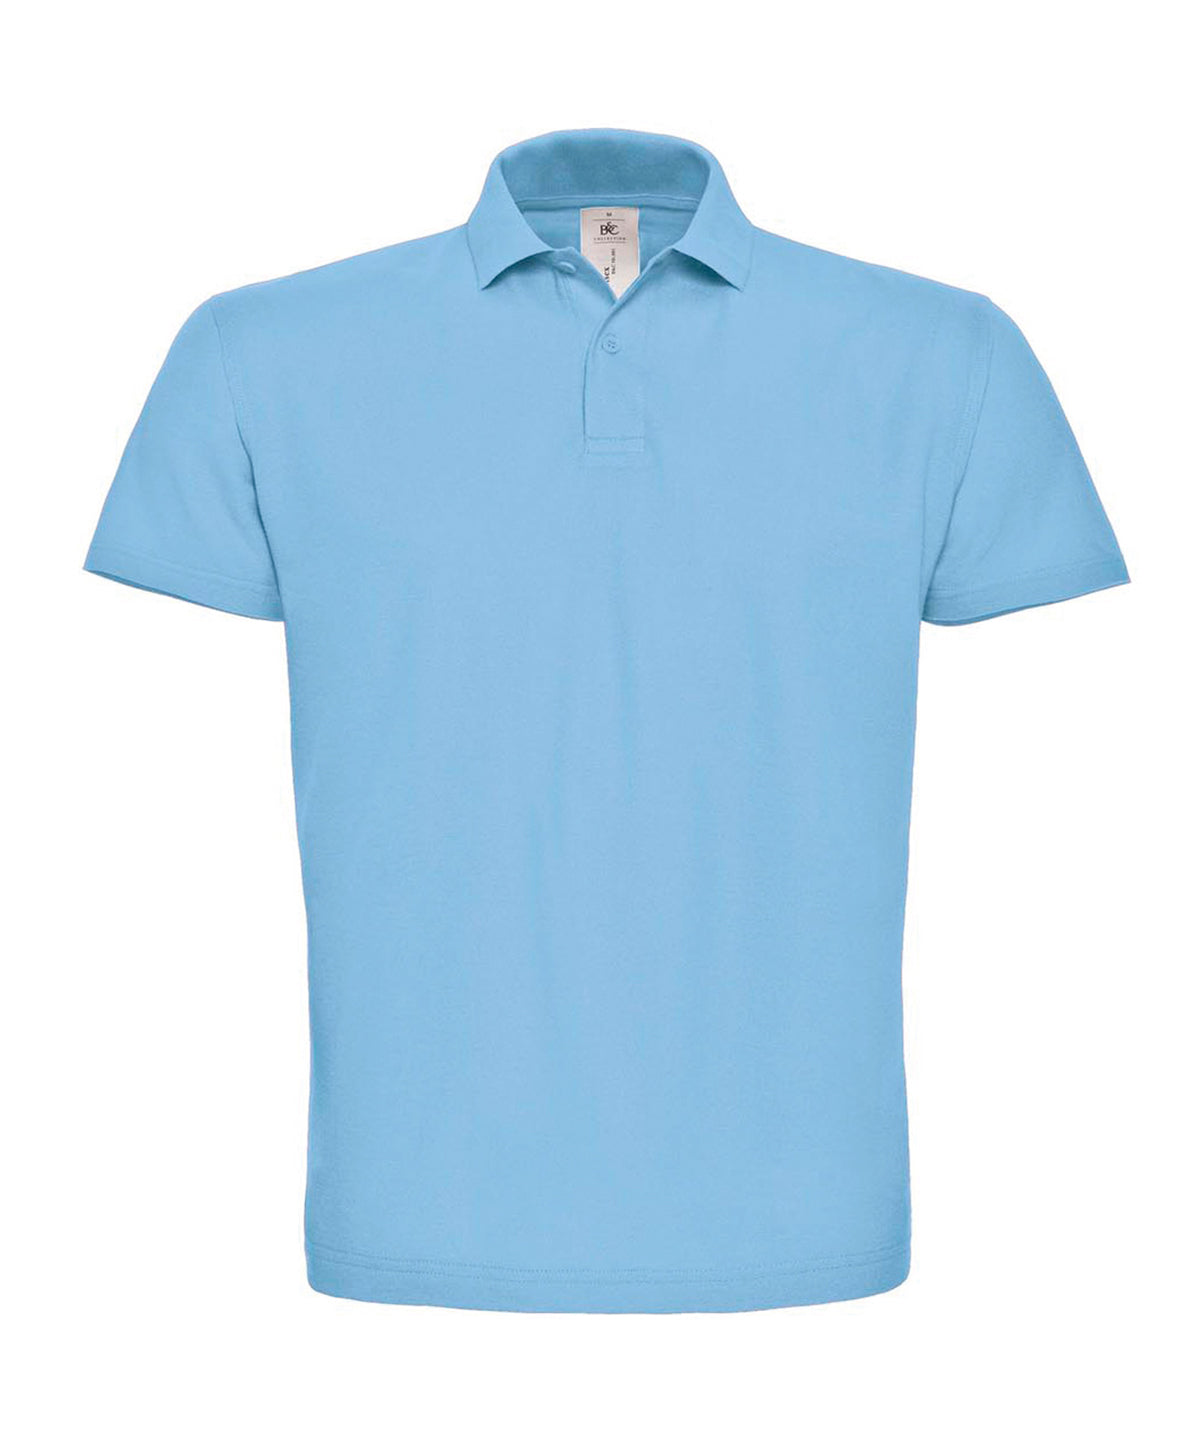 Personalised Polo Shirts - Mid Green B&C Collection B&C ID.001 polo